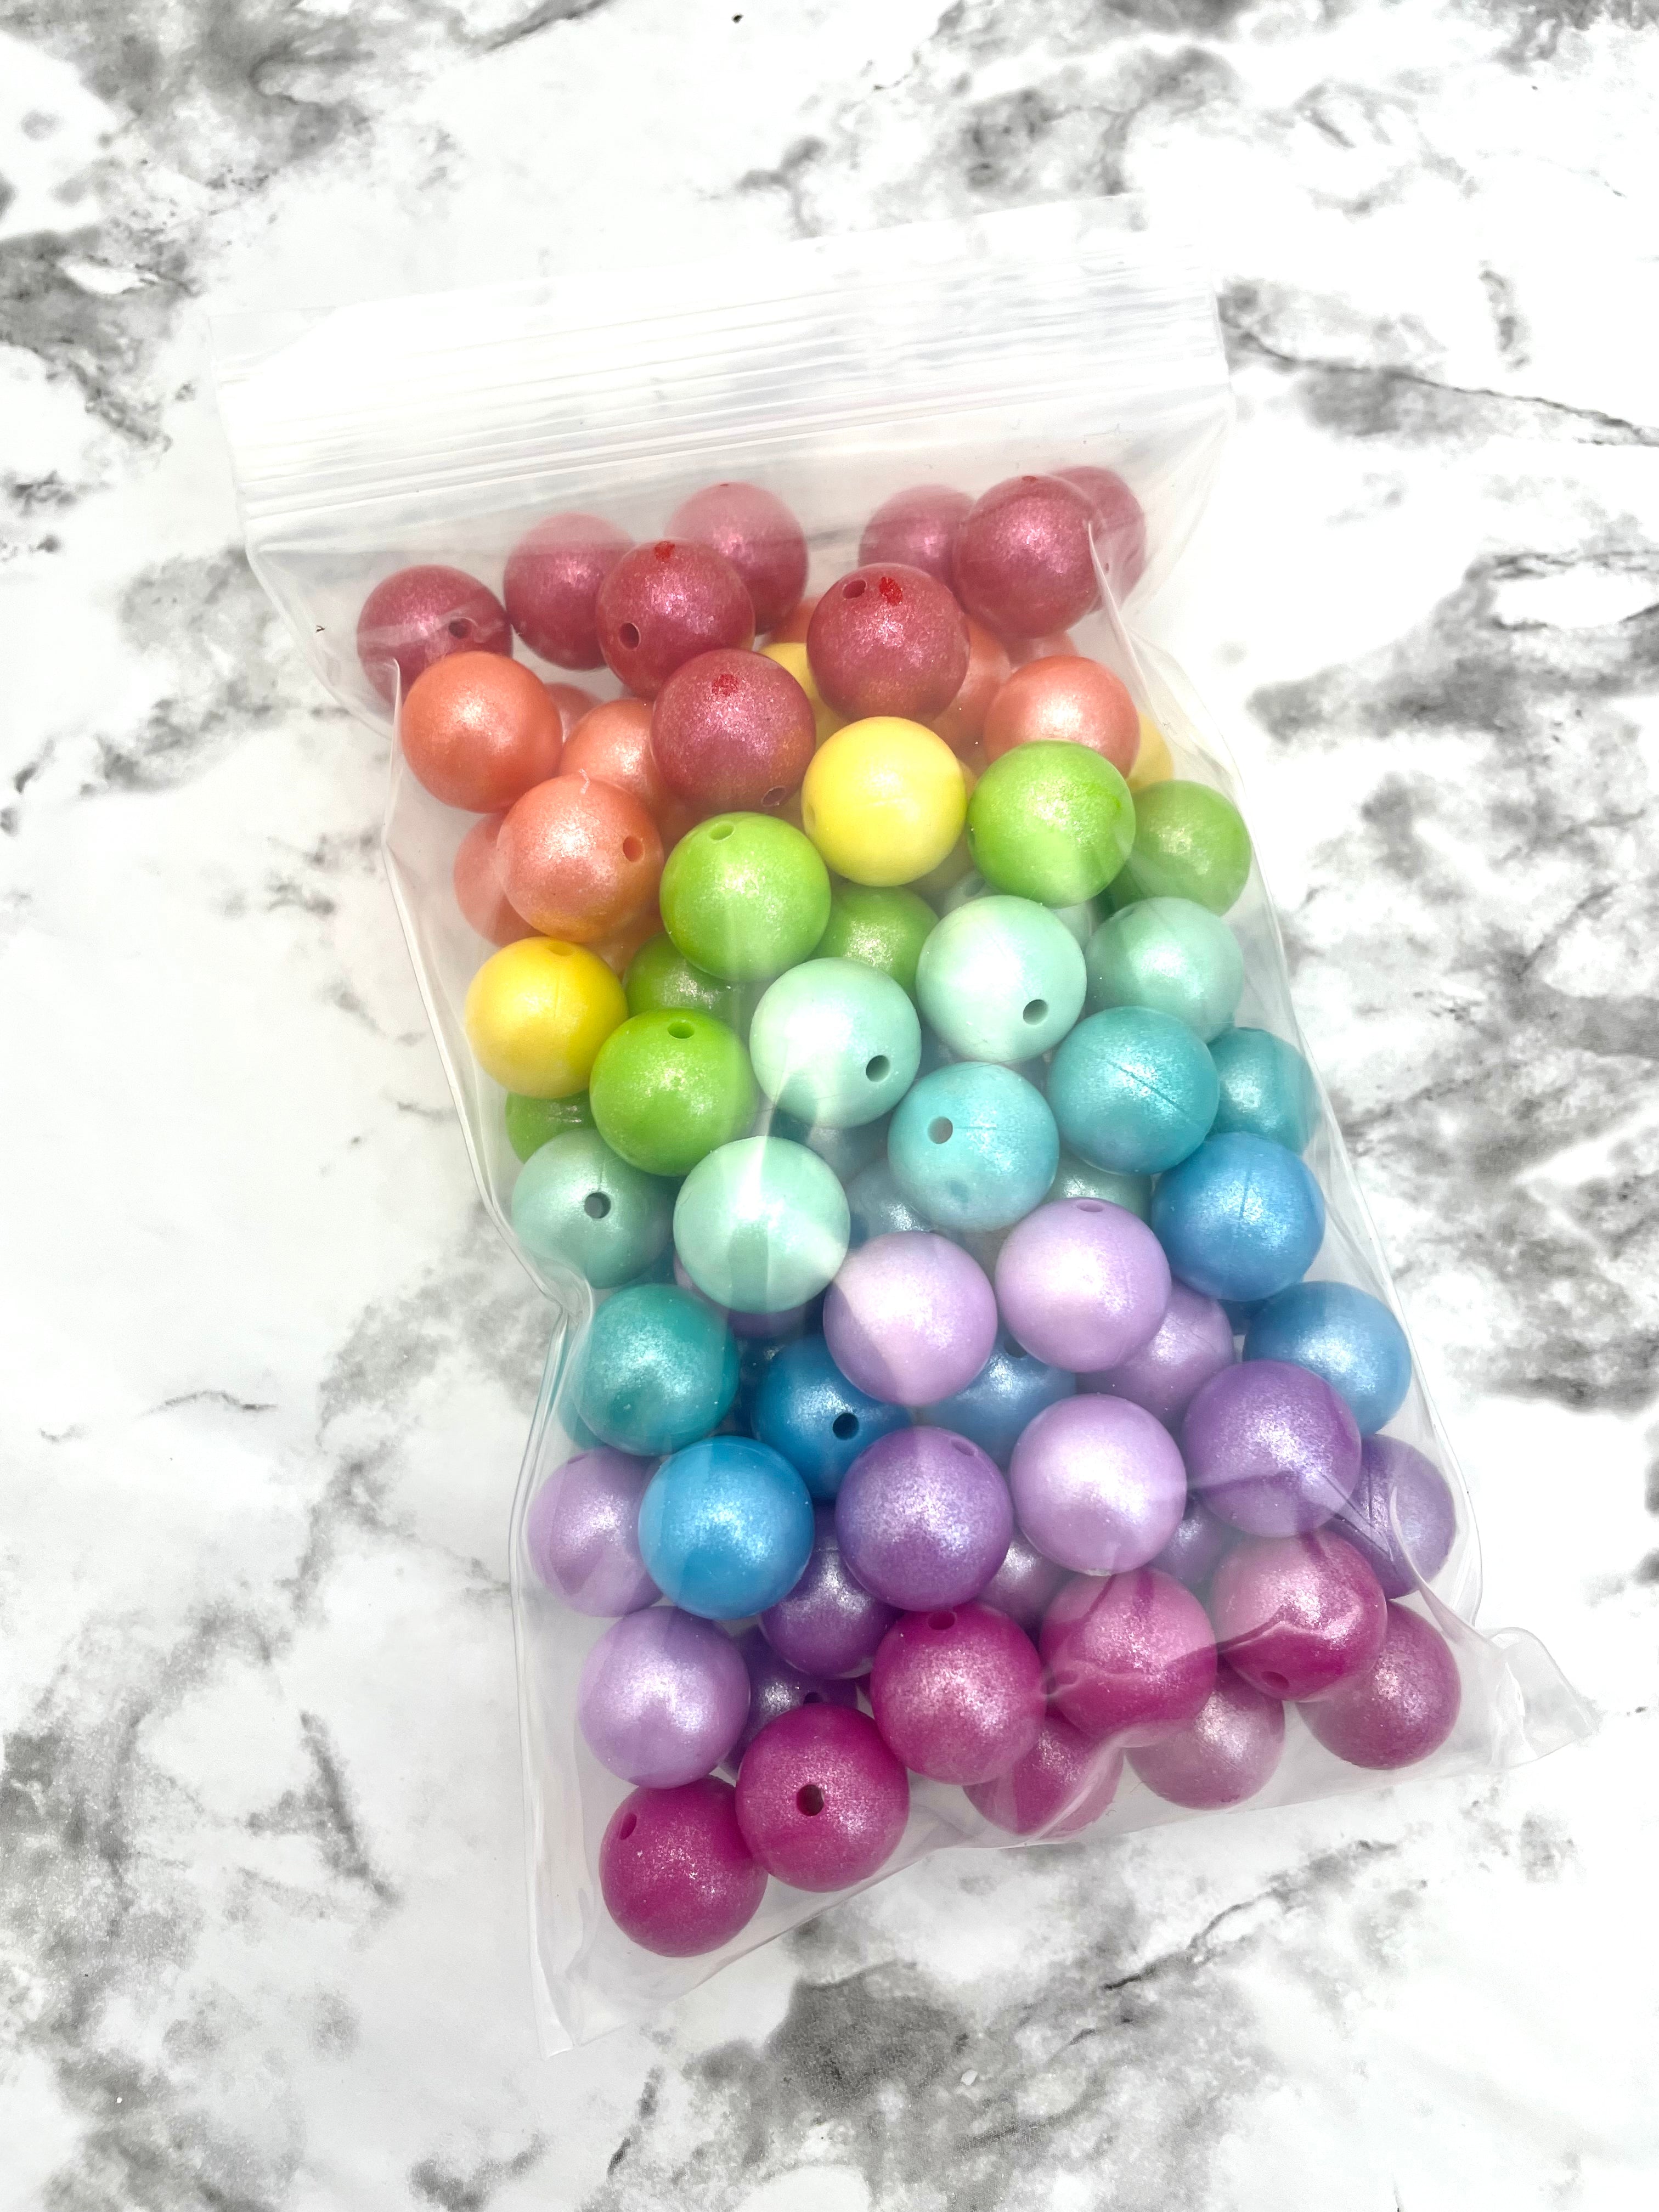 Solid Color #82 - 15mm Silicone Beads - 10 Pack